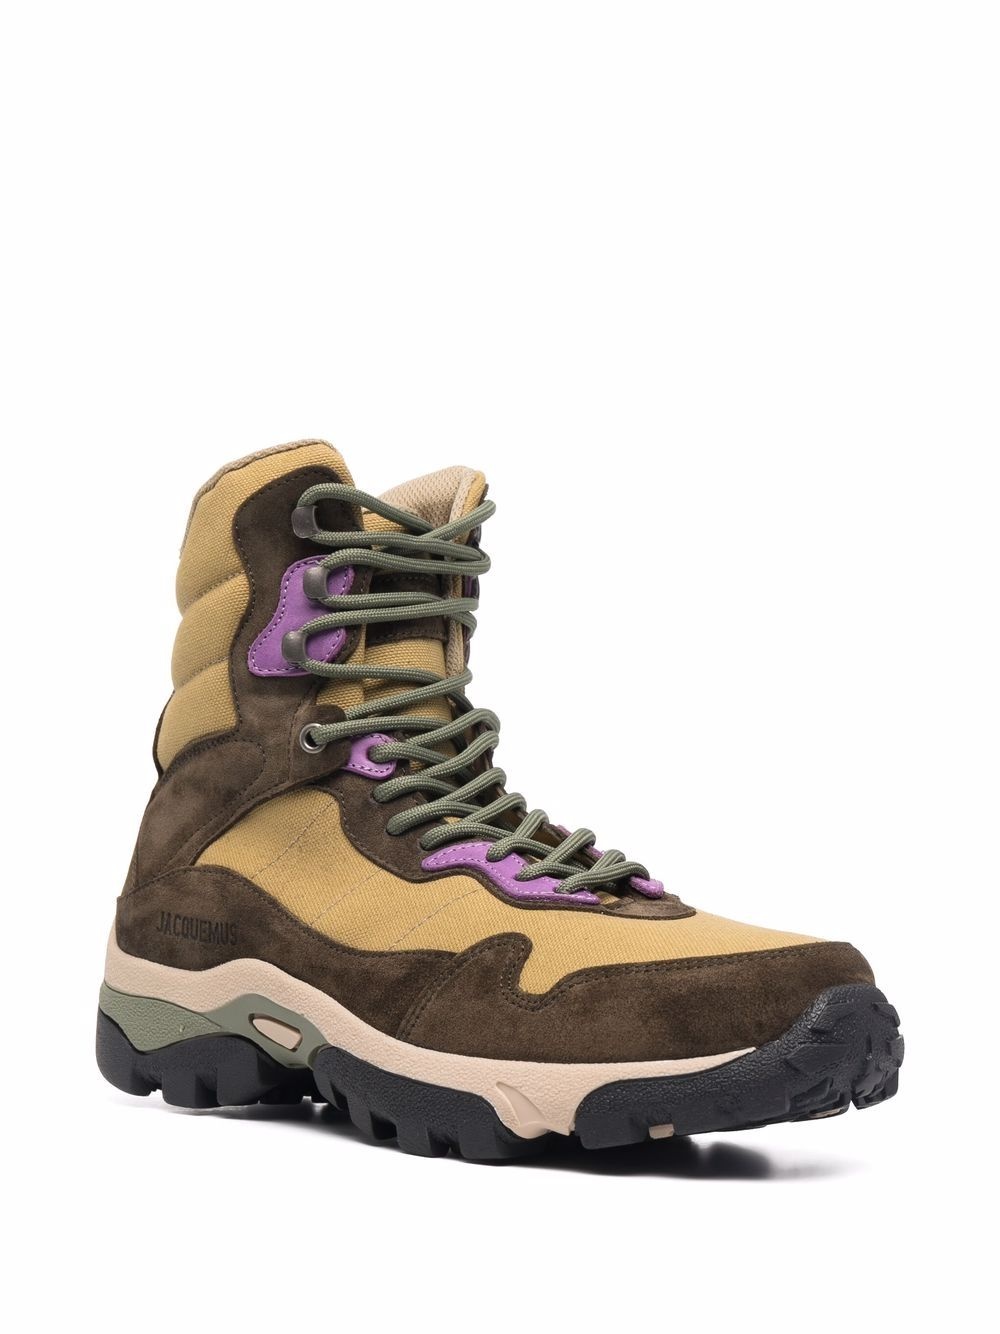 Les Chaussures Terra hiking boots - 2